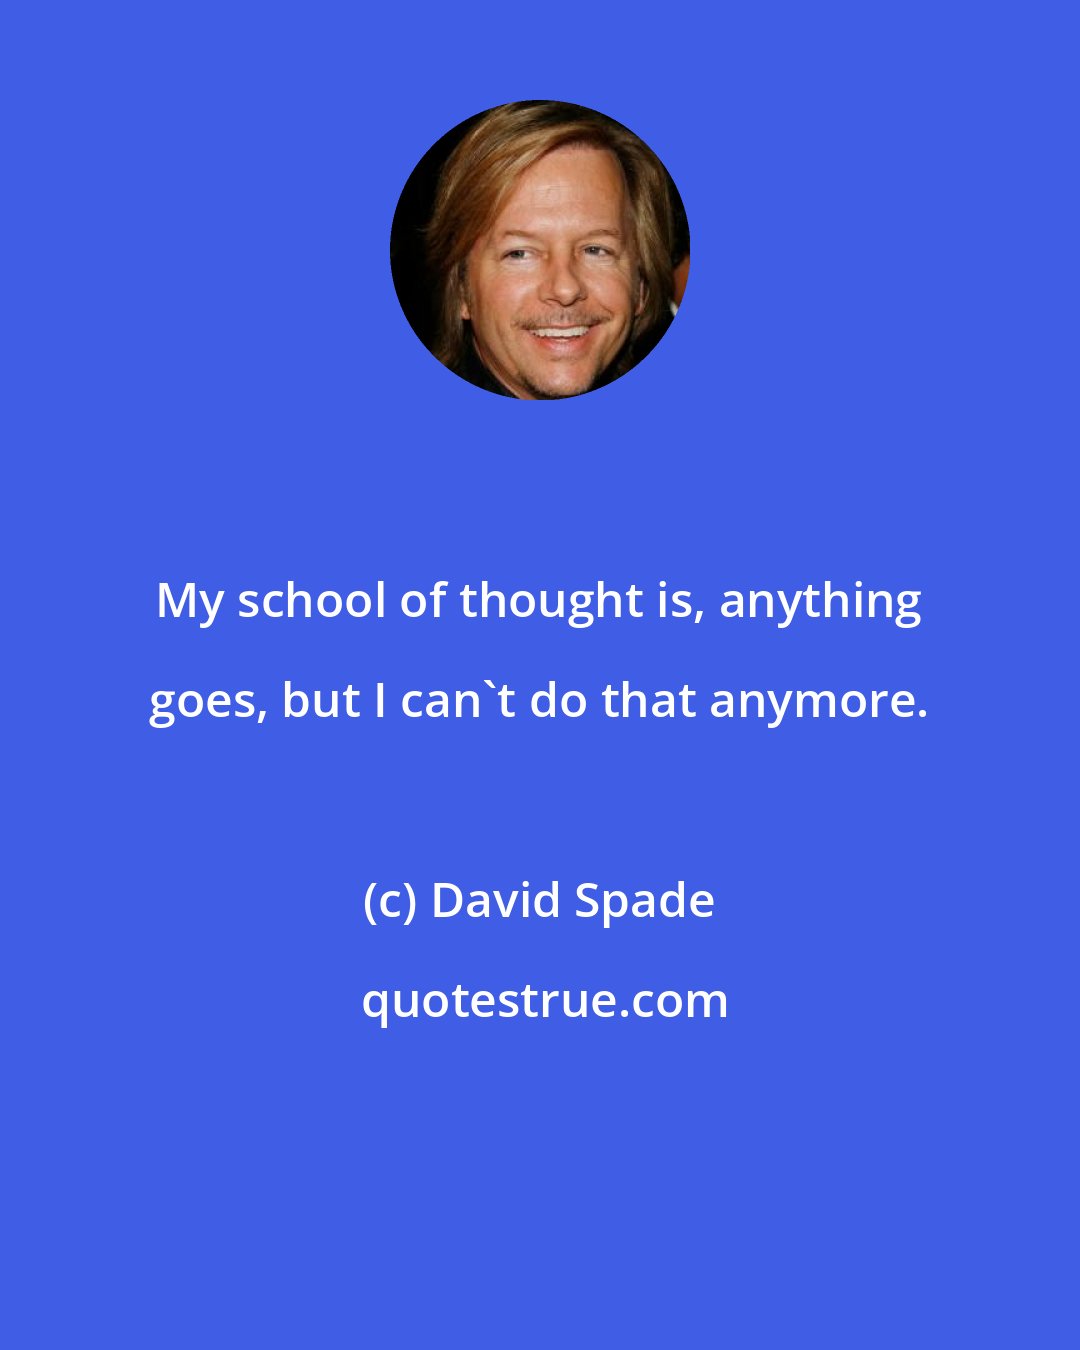 David Spade: My school of thought is, anything goes, but I can't do that anymore.